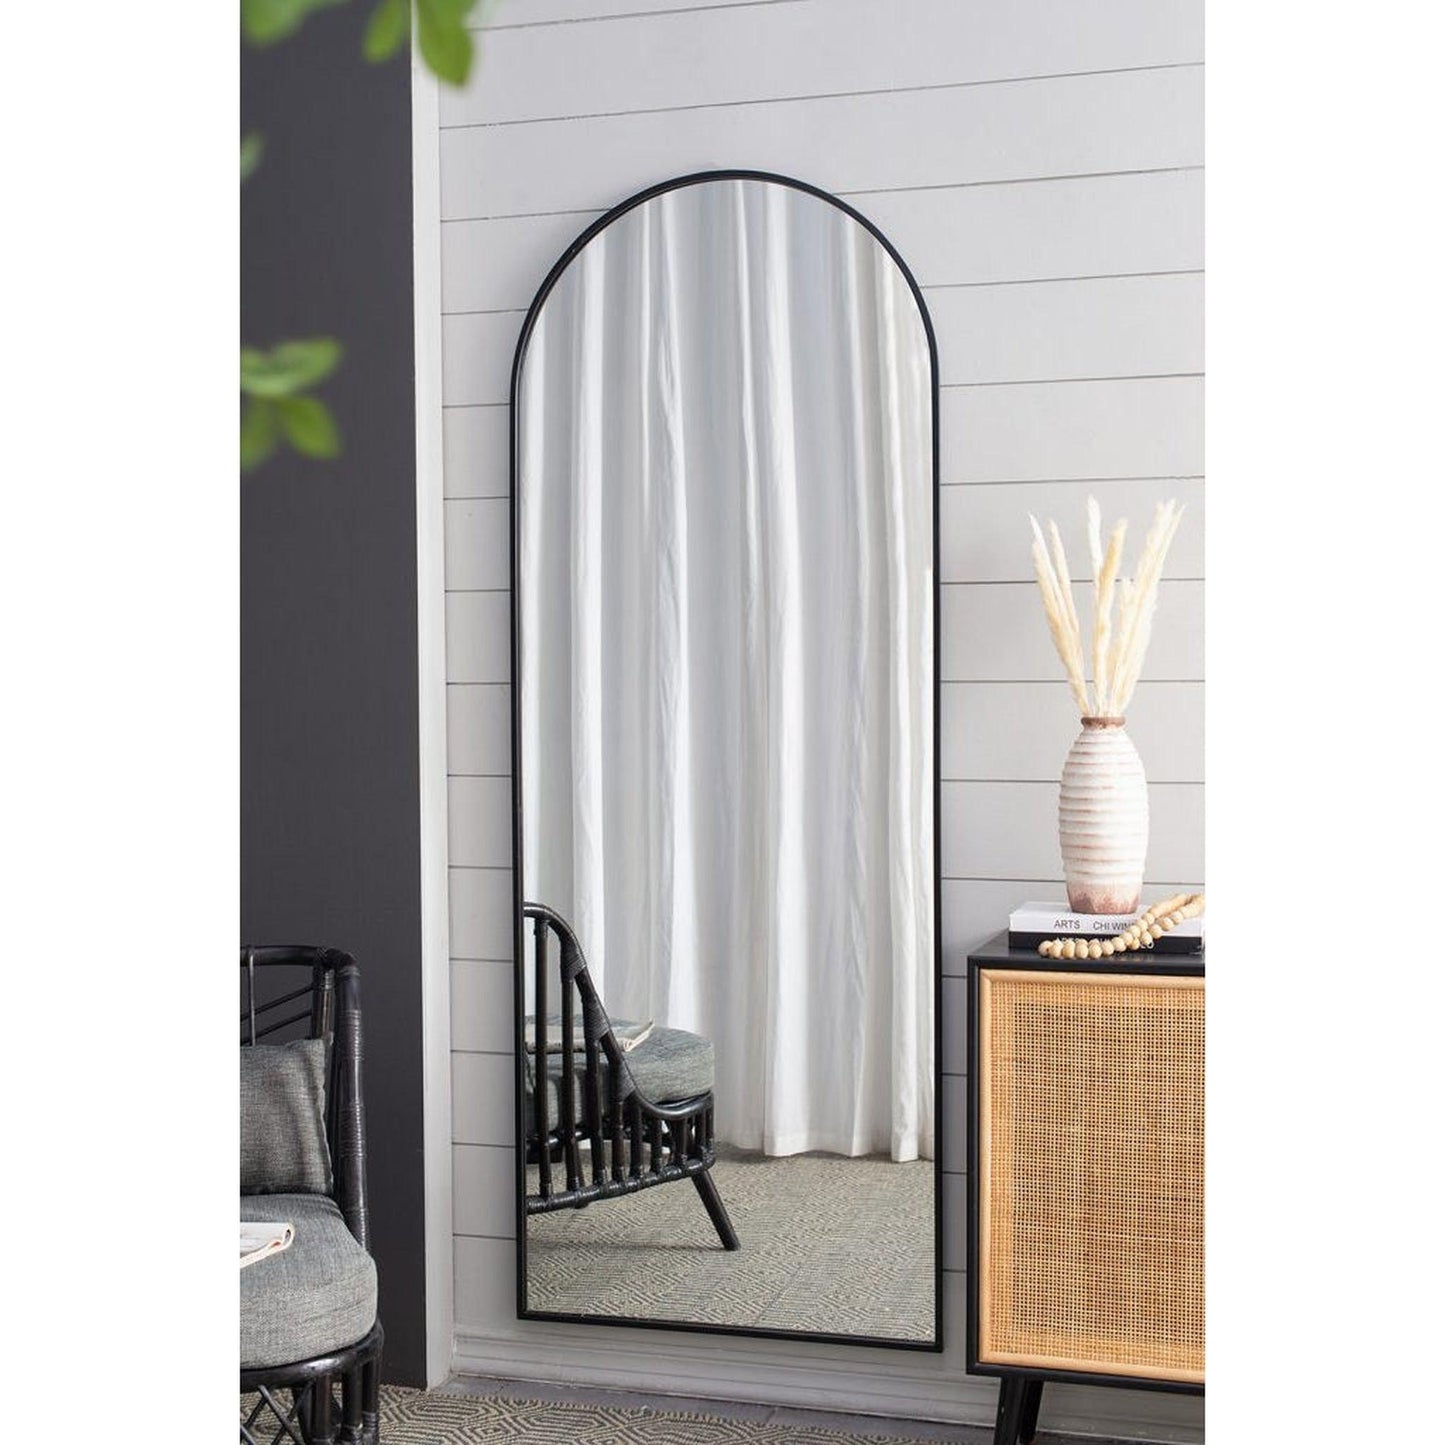 A&B Home Celine 28" x 74" Bundle of 6 Arched Shaped Black Metal Frame Wall-Mounted Body Mirror